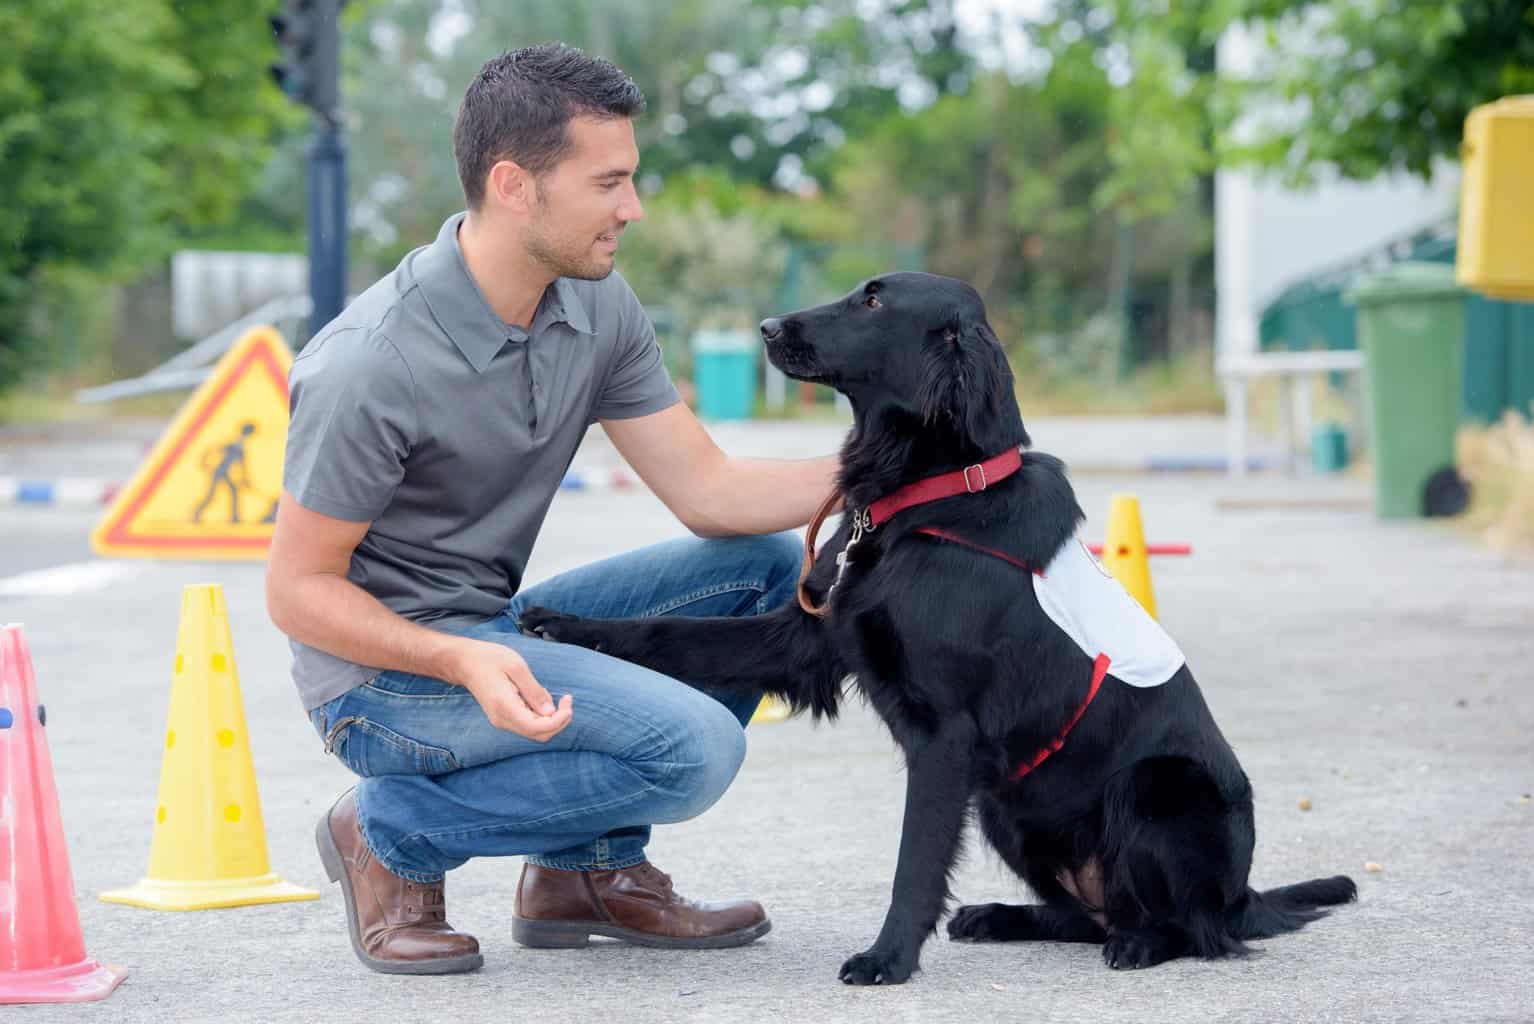 Man trains assistance dog. Training animals is a popular animal job. This career allows you to work with animals and help them learn new tricks or behaviors.